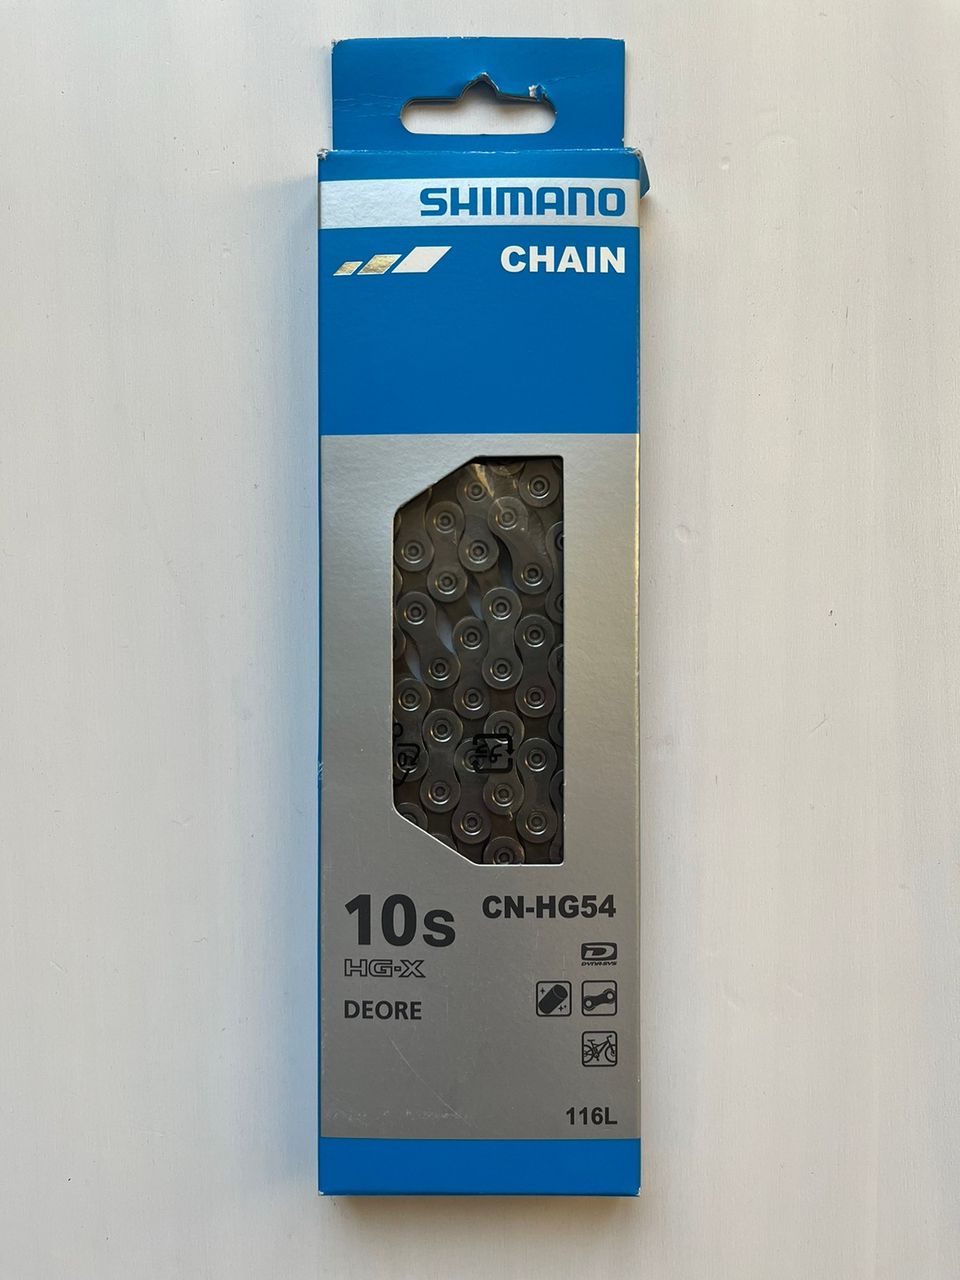 Shimano Deore CN-HG54 Chain 10s